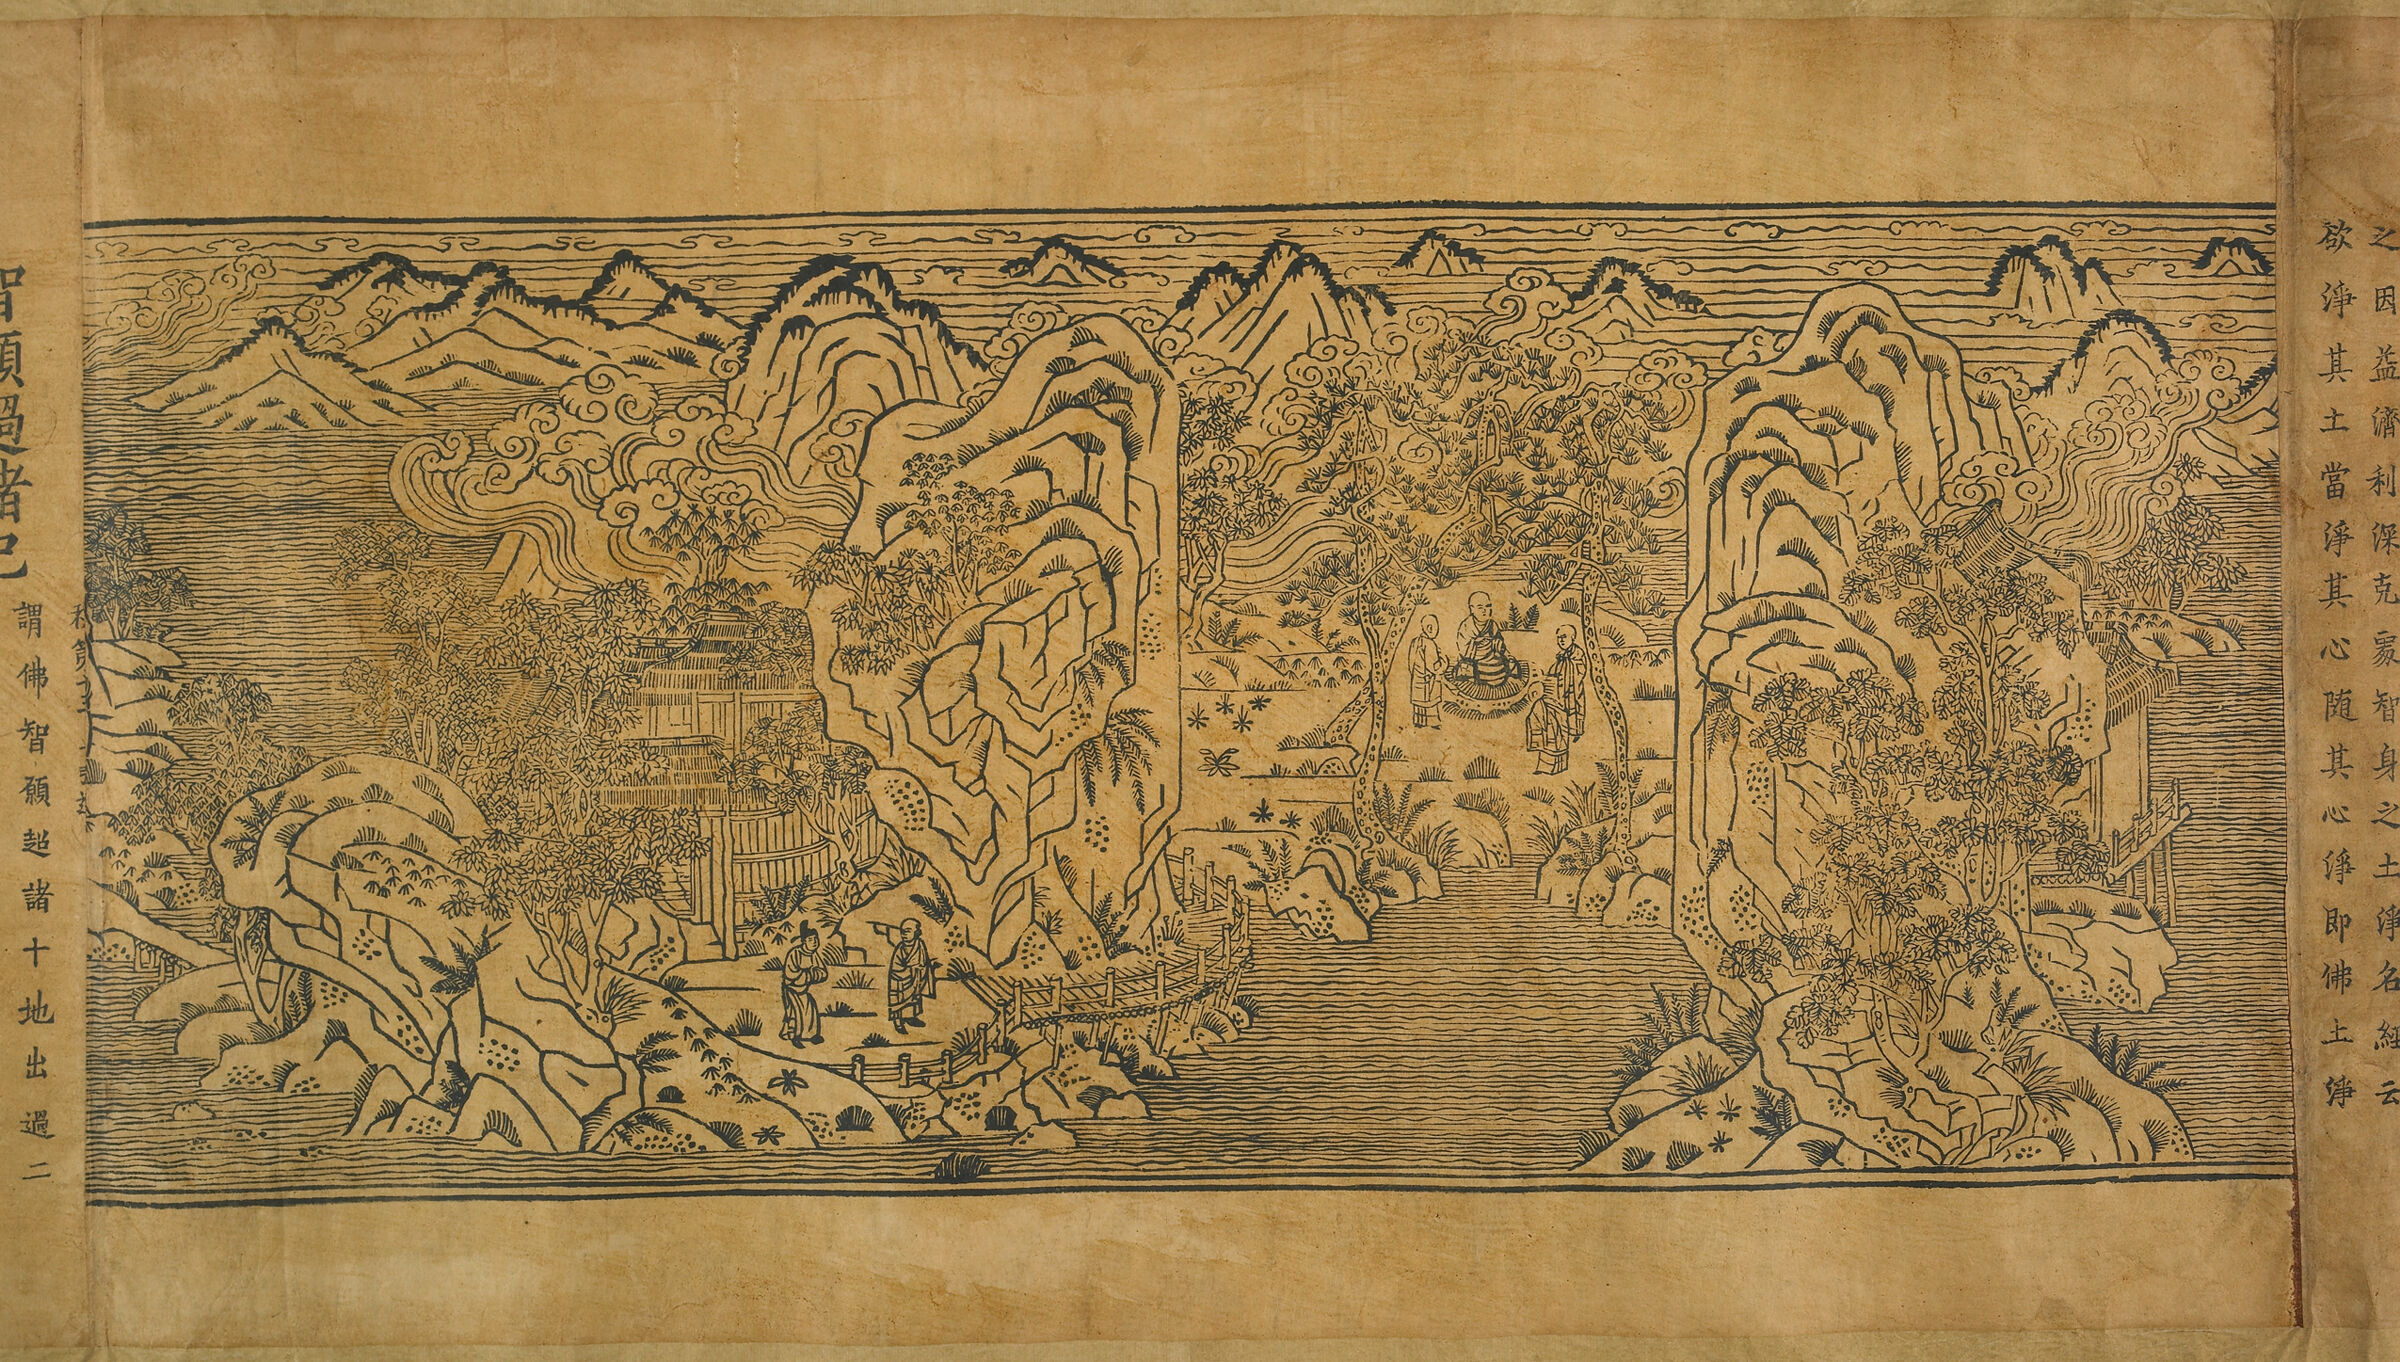 Landscape Illustrations And Leaves 6 Through 10 From Chapter Thirteen Of The Imperial Commentary On The Buddhist Canon (Tripitaka) Commissioned By Emperor Taizong (R. 976-997)